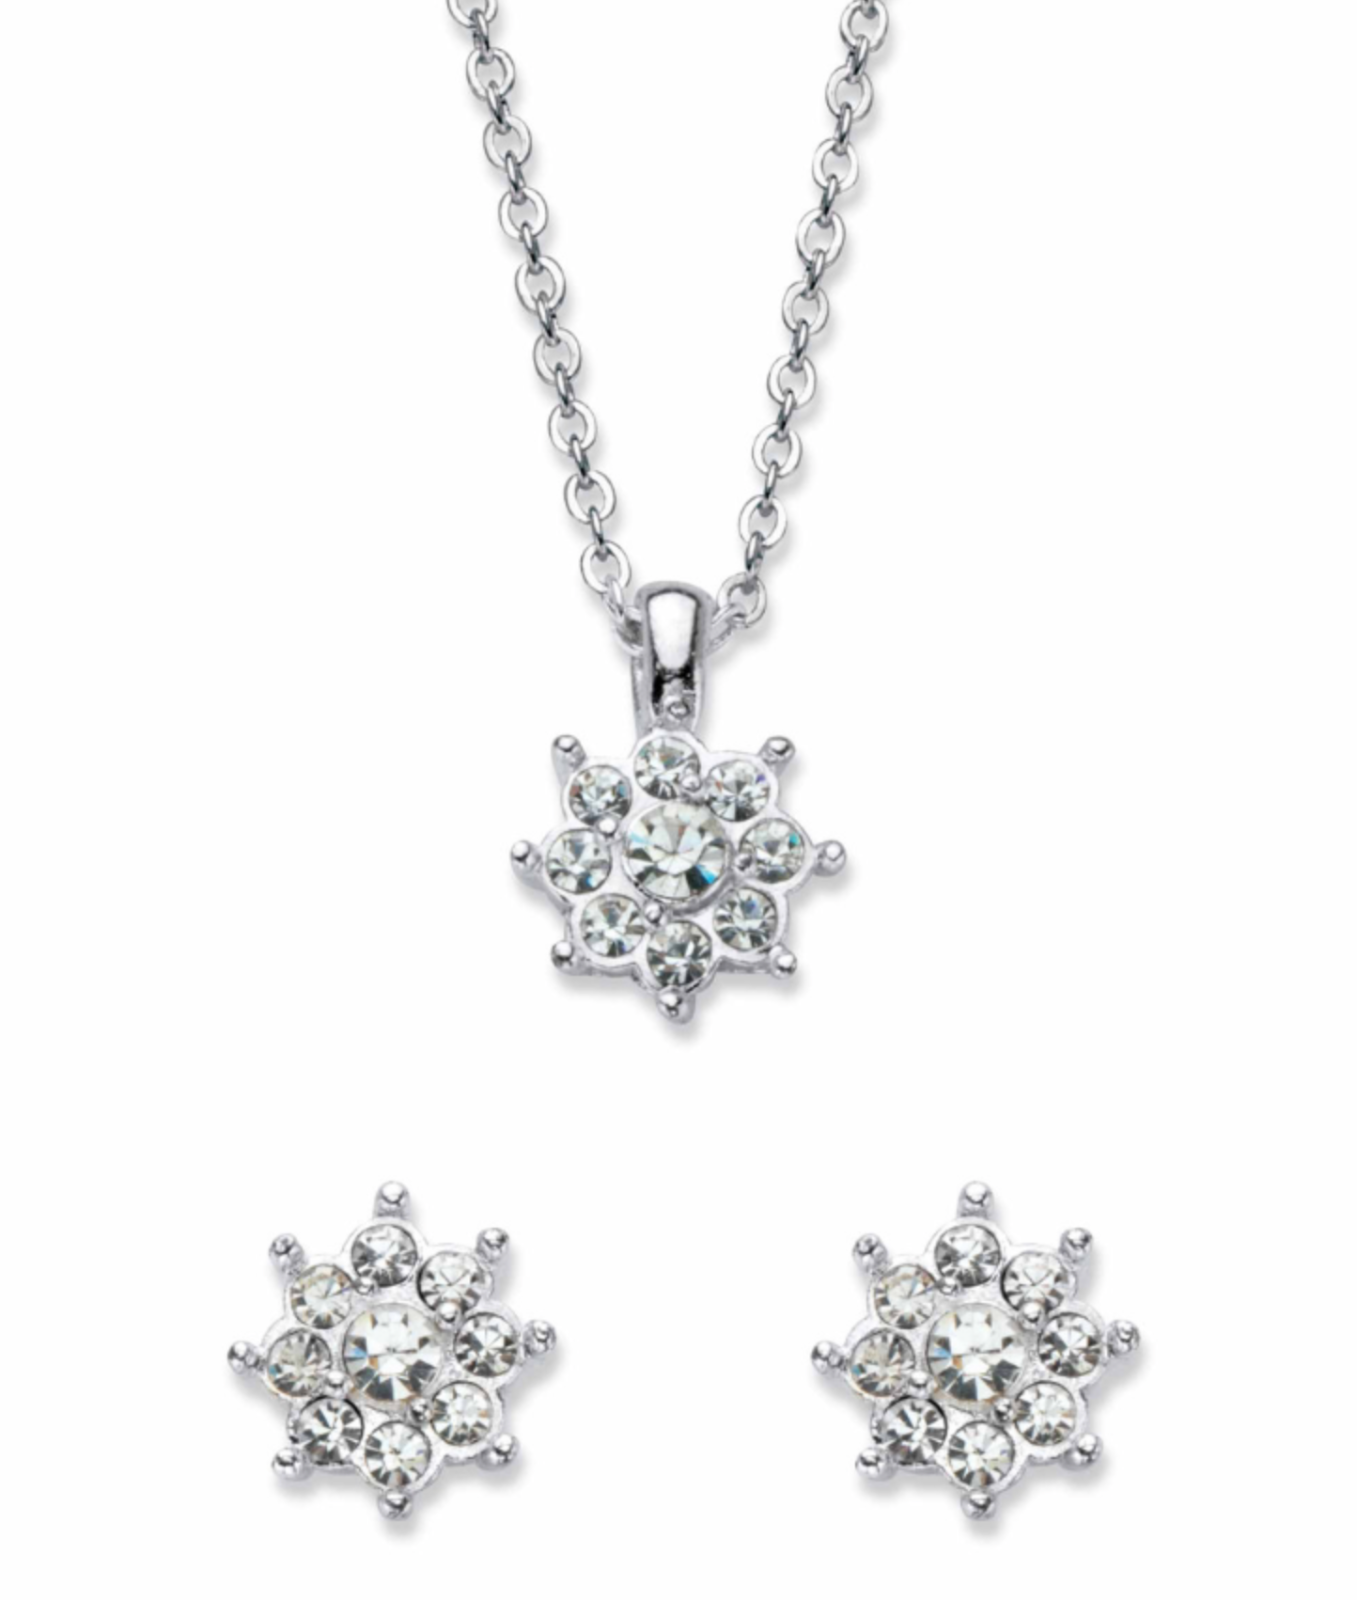 Primary image for ROUND CRYSTAL FLOWER STUD EARRING AND NECKLACE IN SILVERTONE